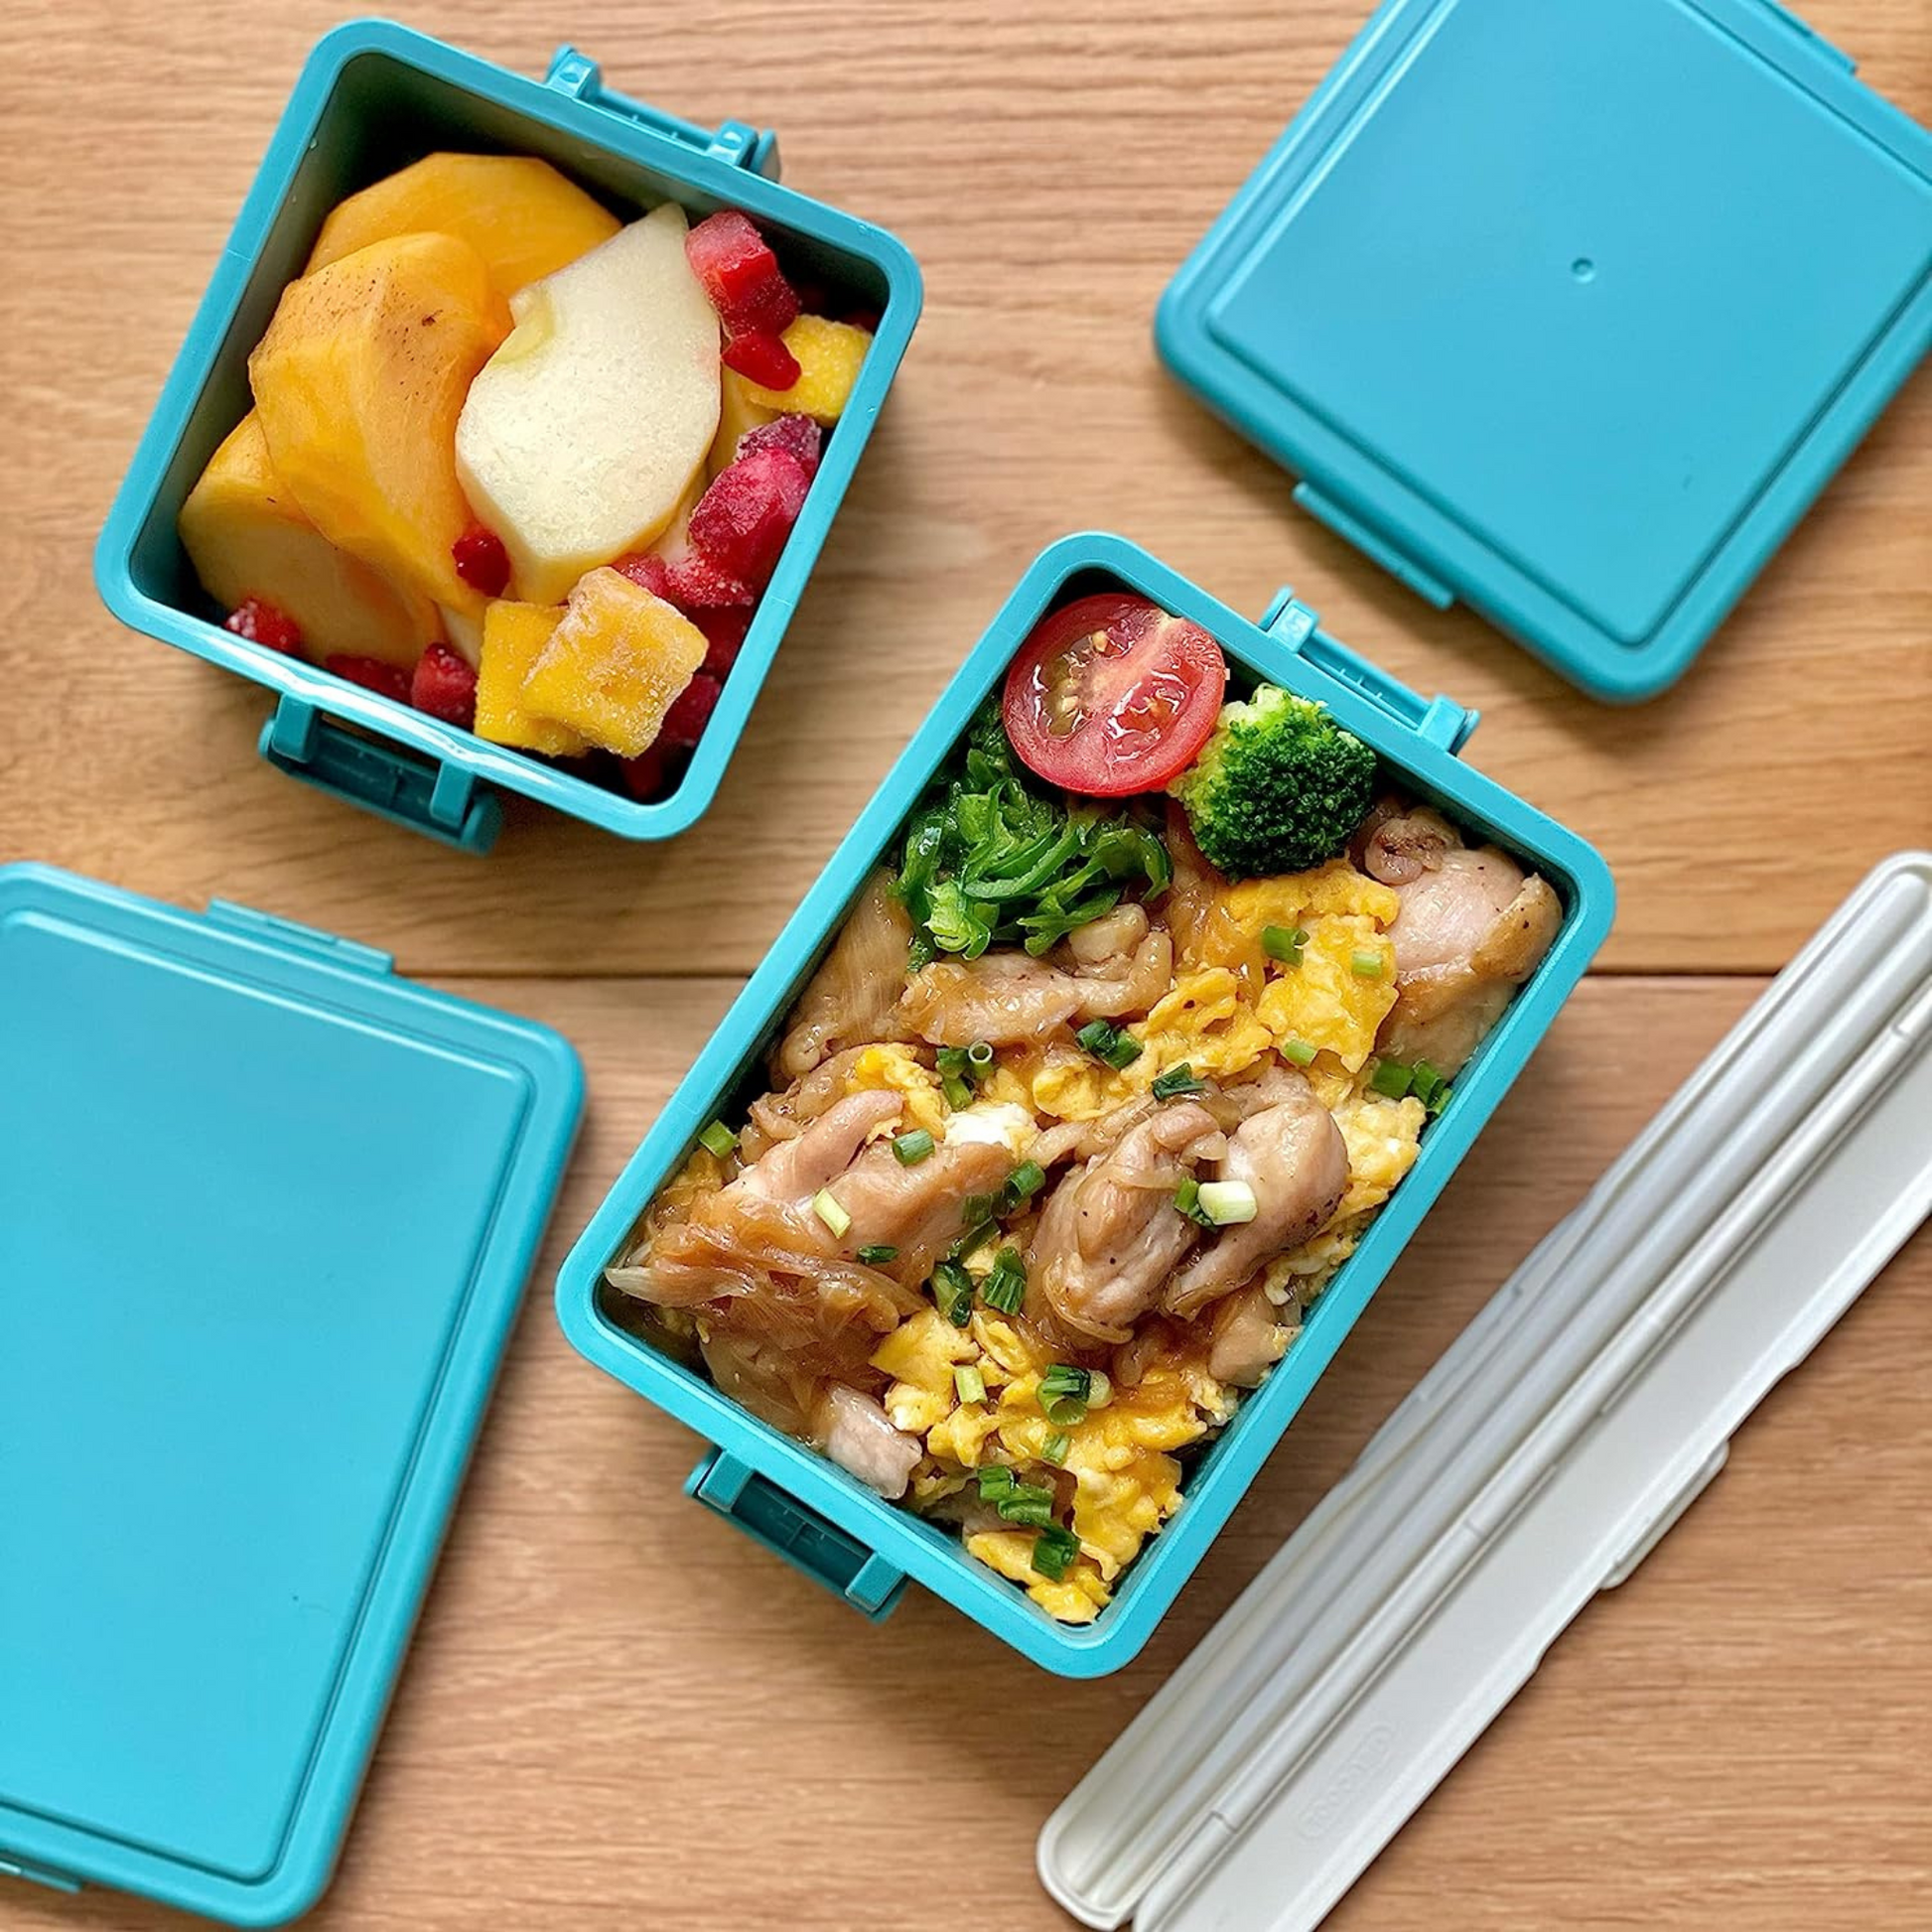 Bento Boxes for Adults & Kids, Stylish